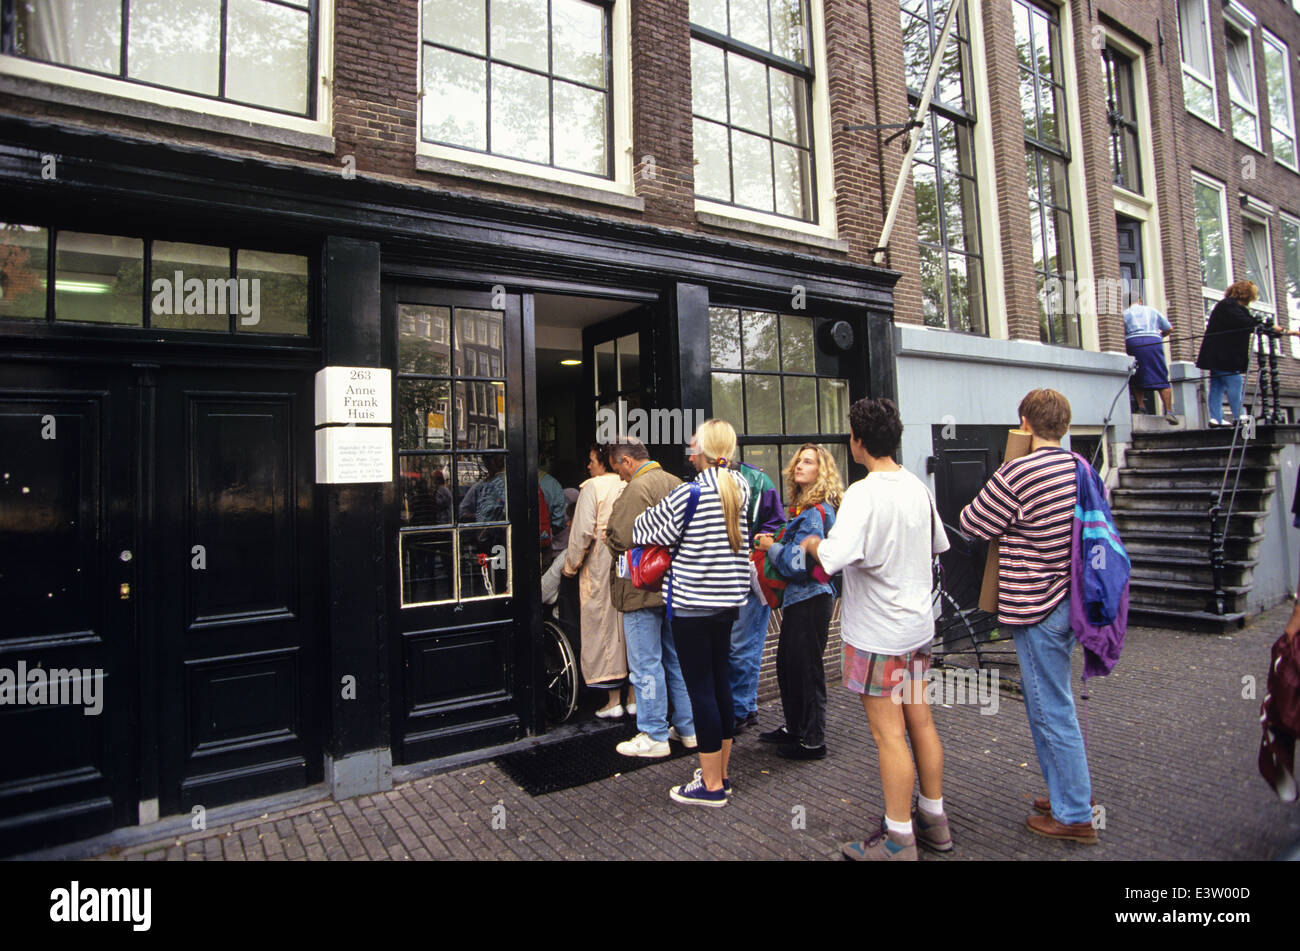 The "Cue" starts early at AnnFrank House, Amsterdam, Holland. Stock Photo